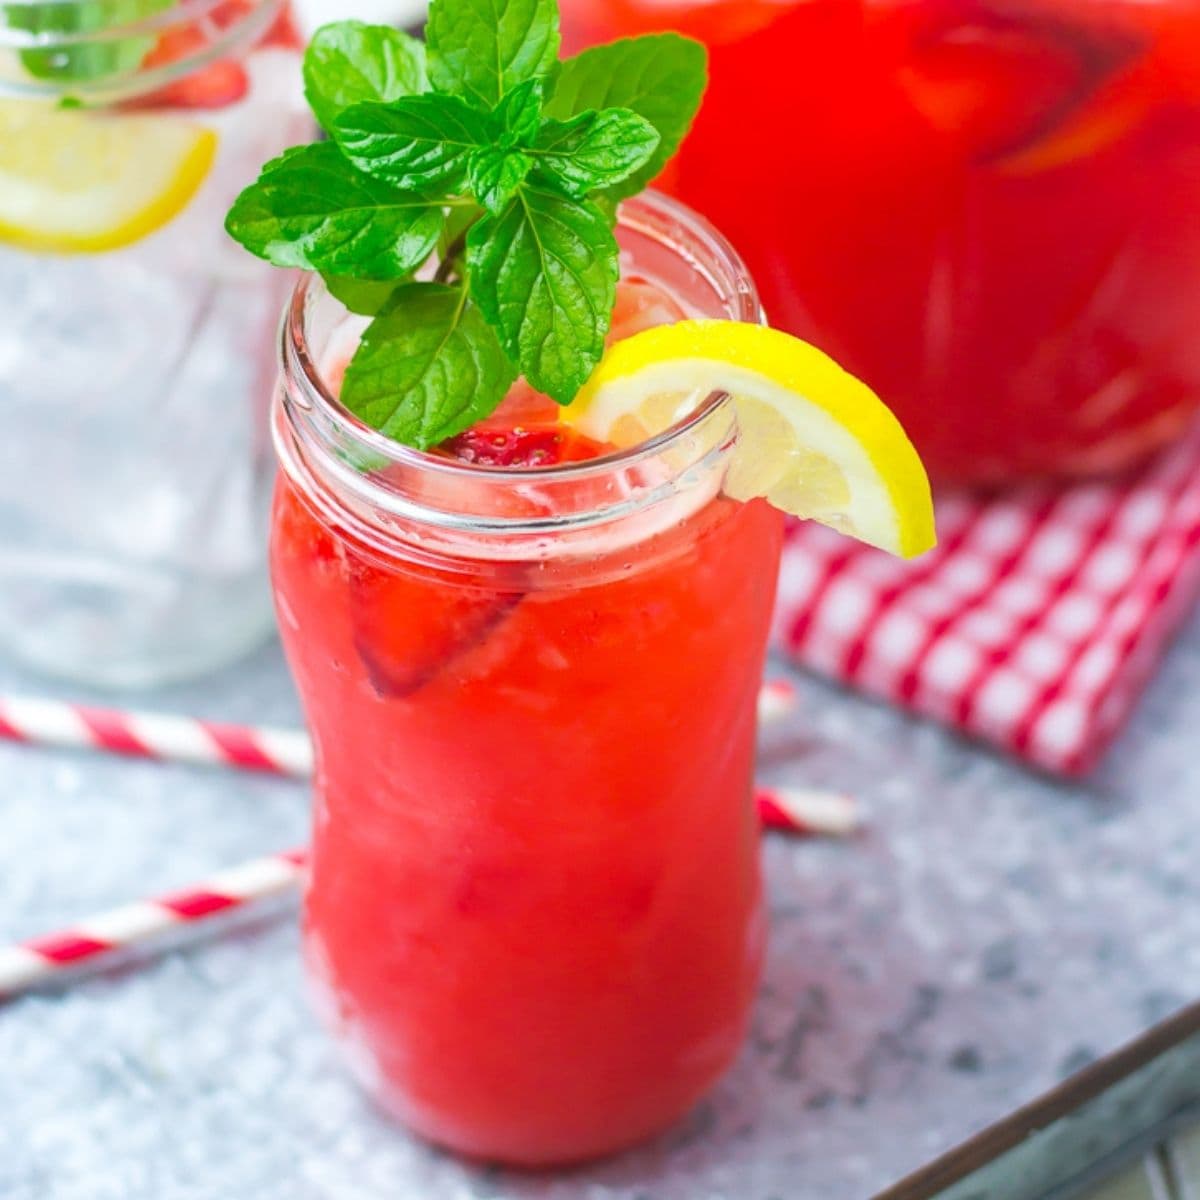 A glass jar filled with strawberry lemonade, with the filled pitcher in the background.